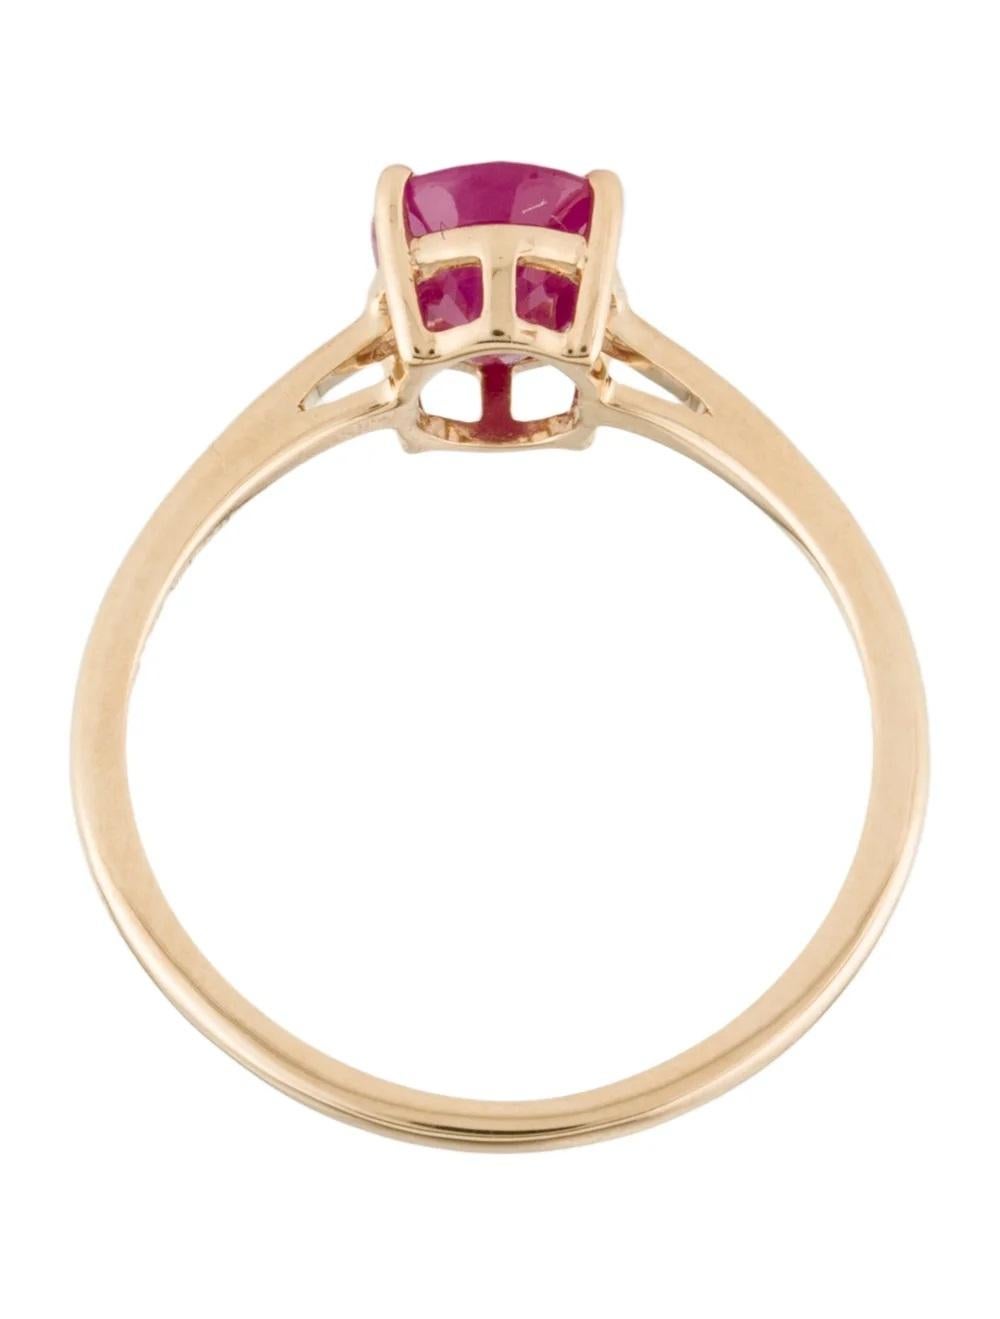 Women's 14K Ruby Cocktail Ring, 1.41ct, Size 7 - Classic Design, Timeless Elegance For Sale